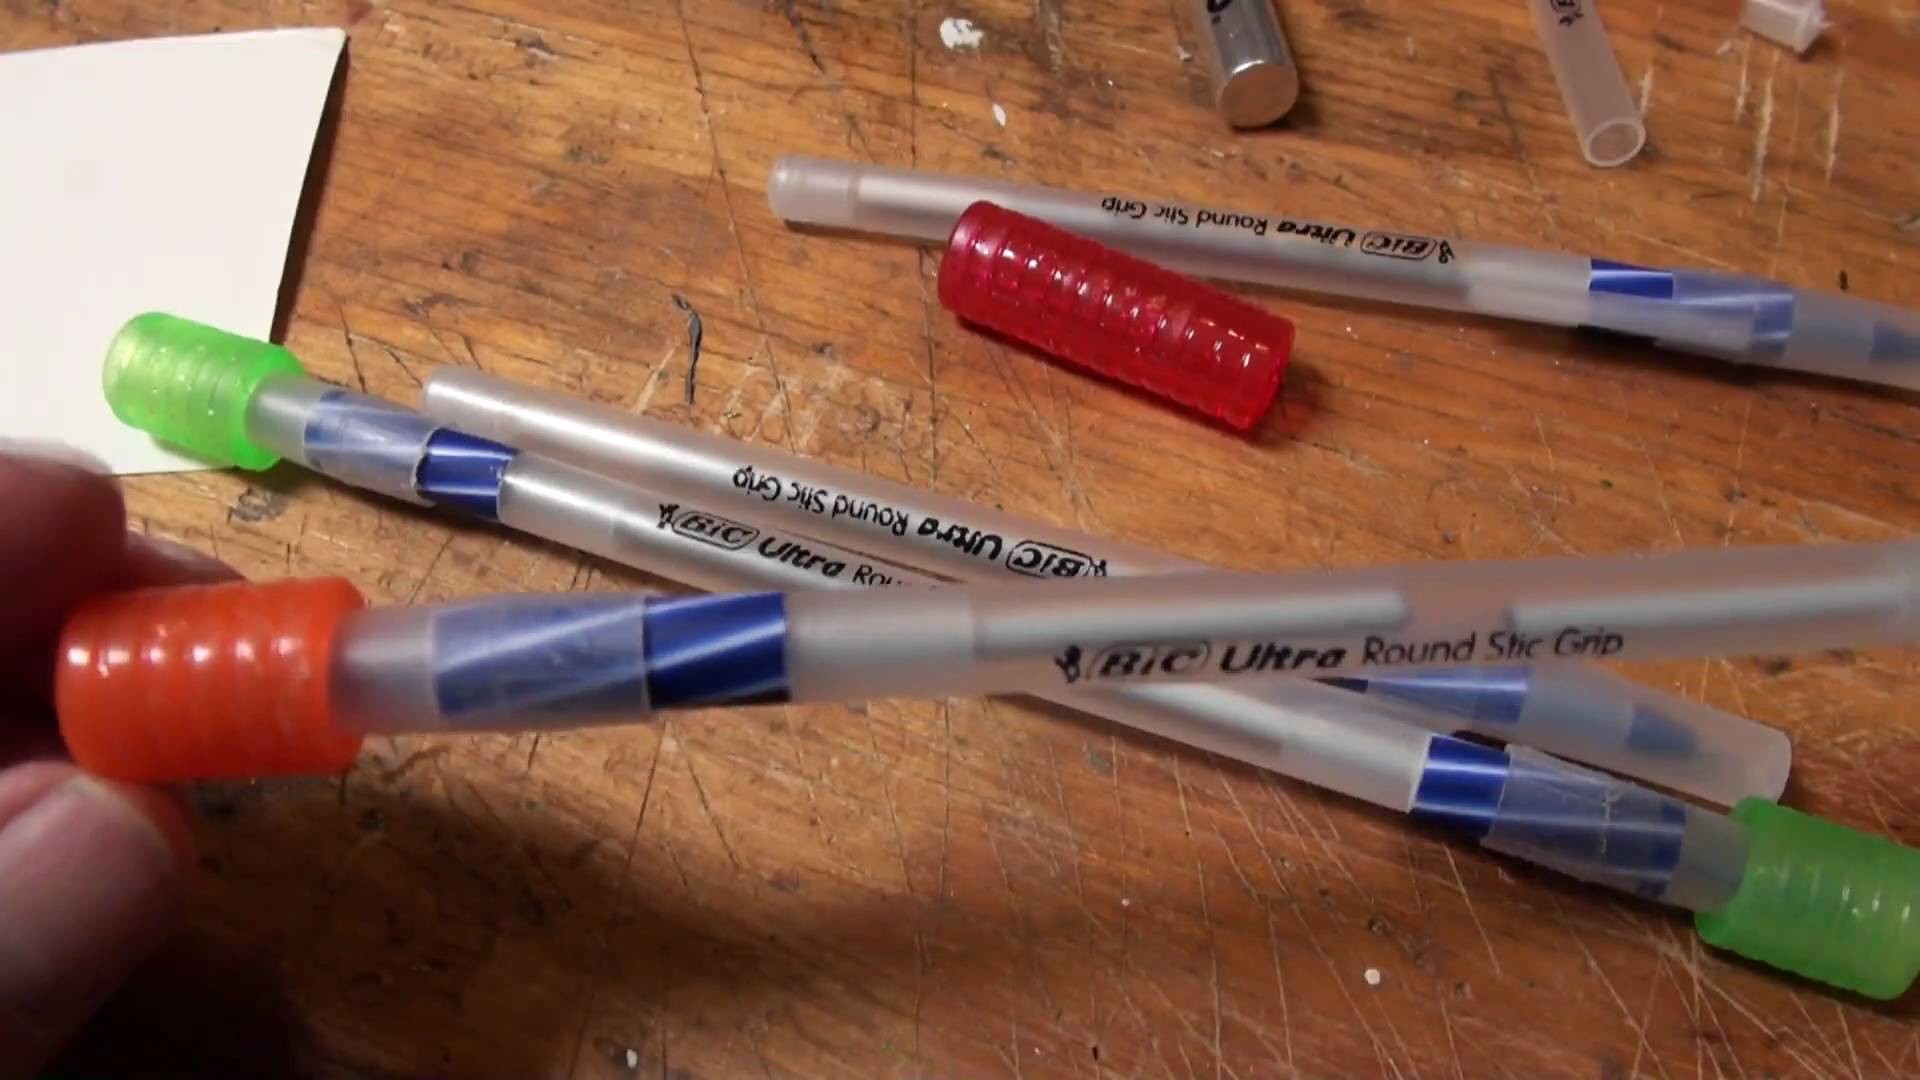 How to Make a BICtory Pen-Spinning Pratice Pen from Bic Ultra Round Stic Grip pens